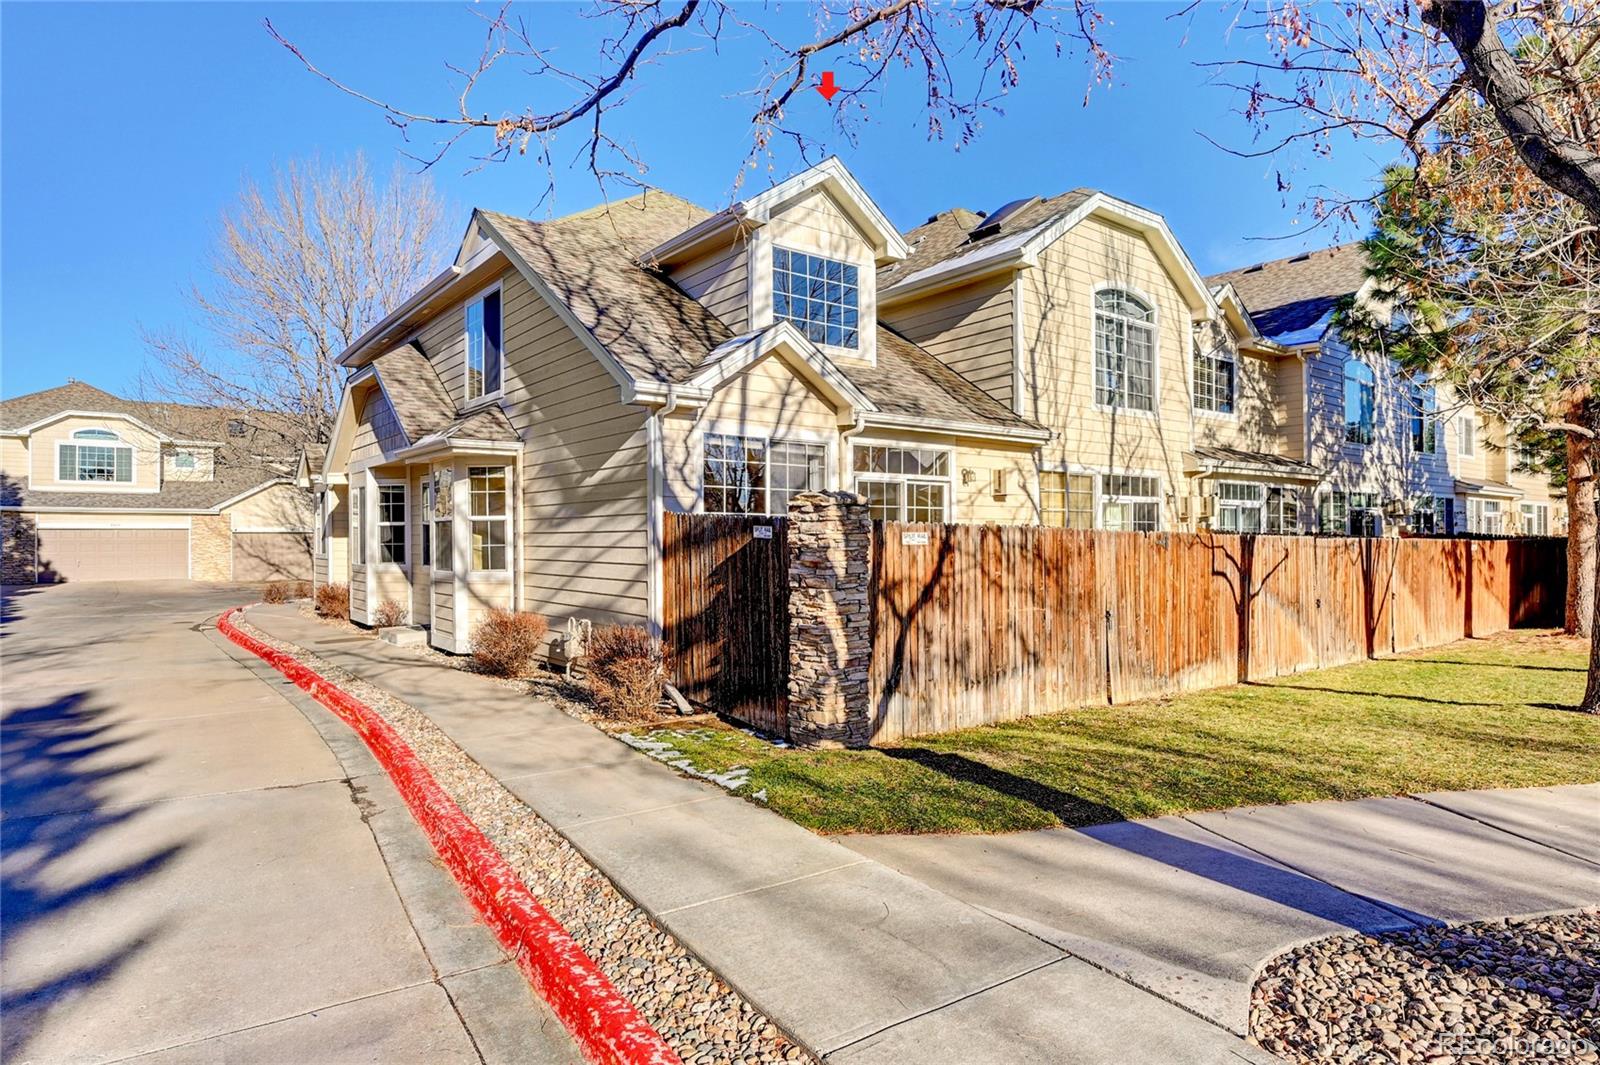 Report Image for 9001 W Phillips Drive,Littleton, Colorado